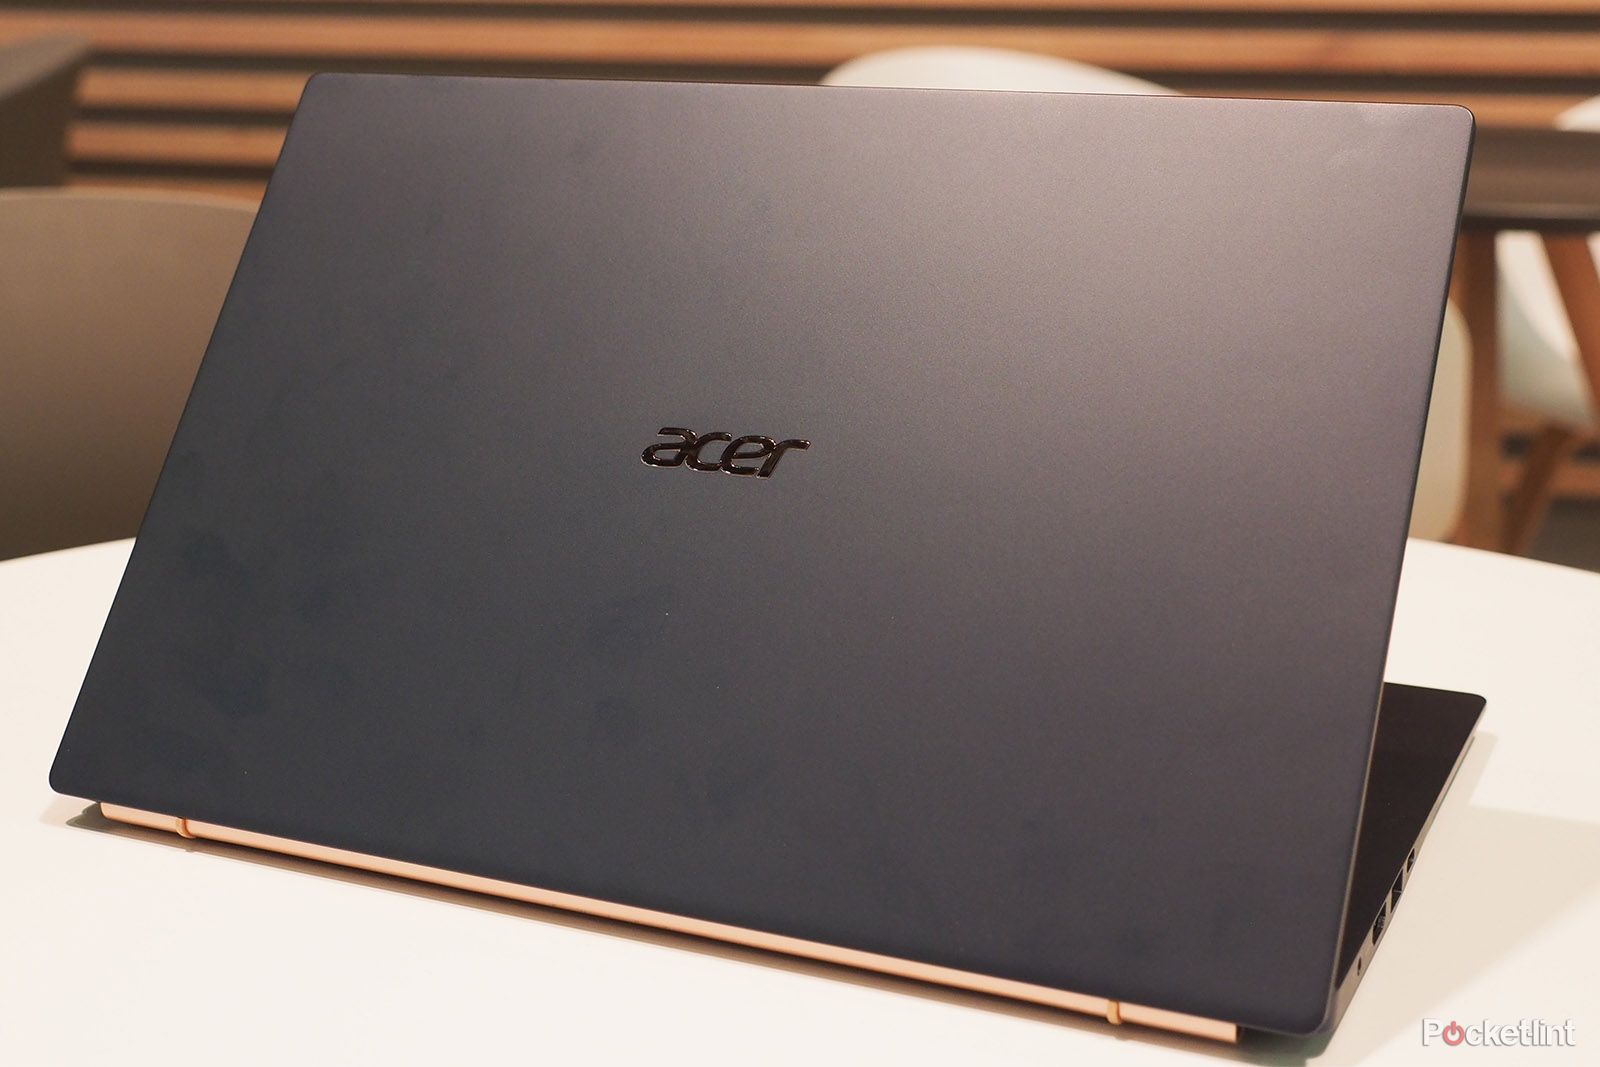 Acer Swift 5 review 2019 image 2